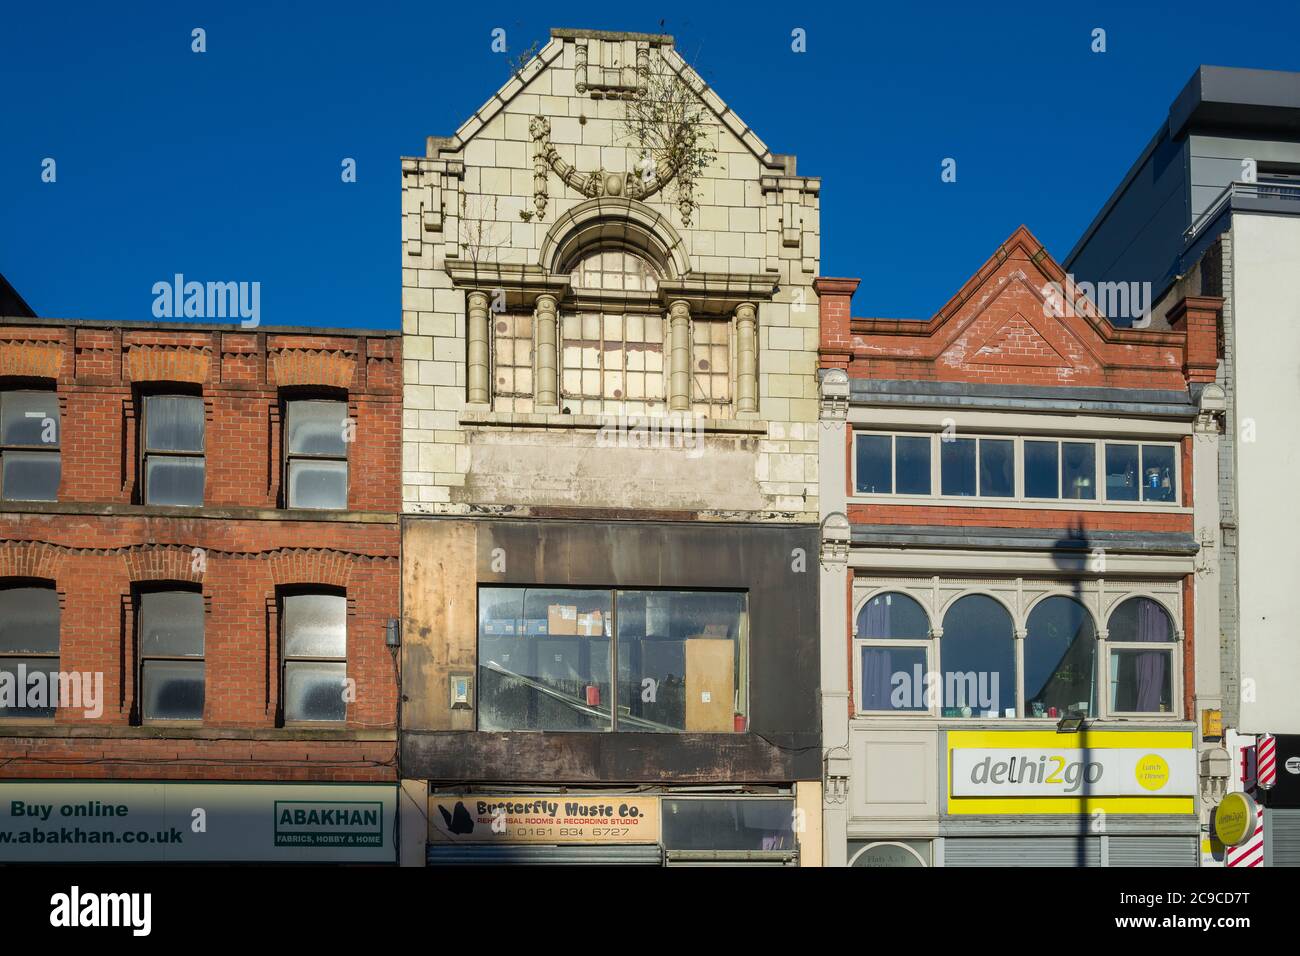 Upper storeys of various shops on Oldham Street, Manchester, UK. Building with different styles and from different eras. Stock Photo